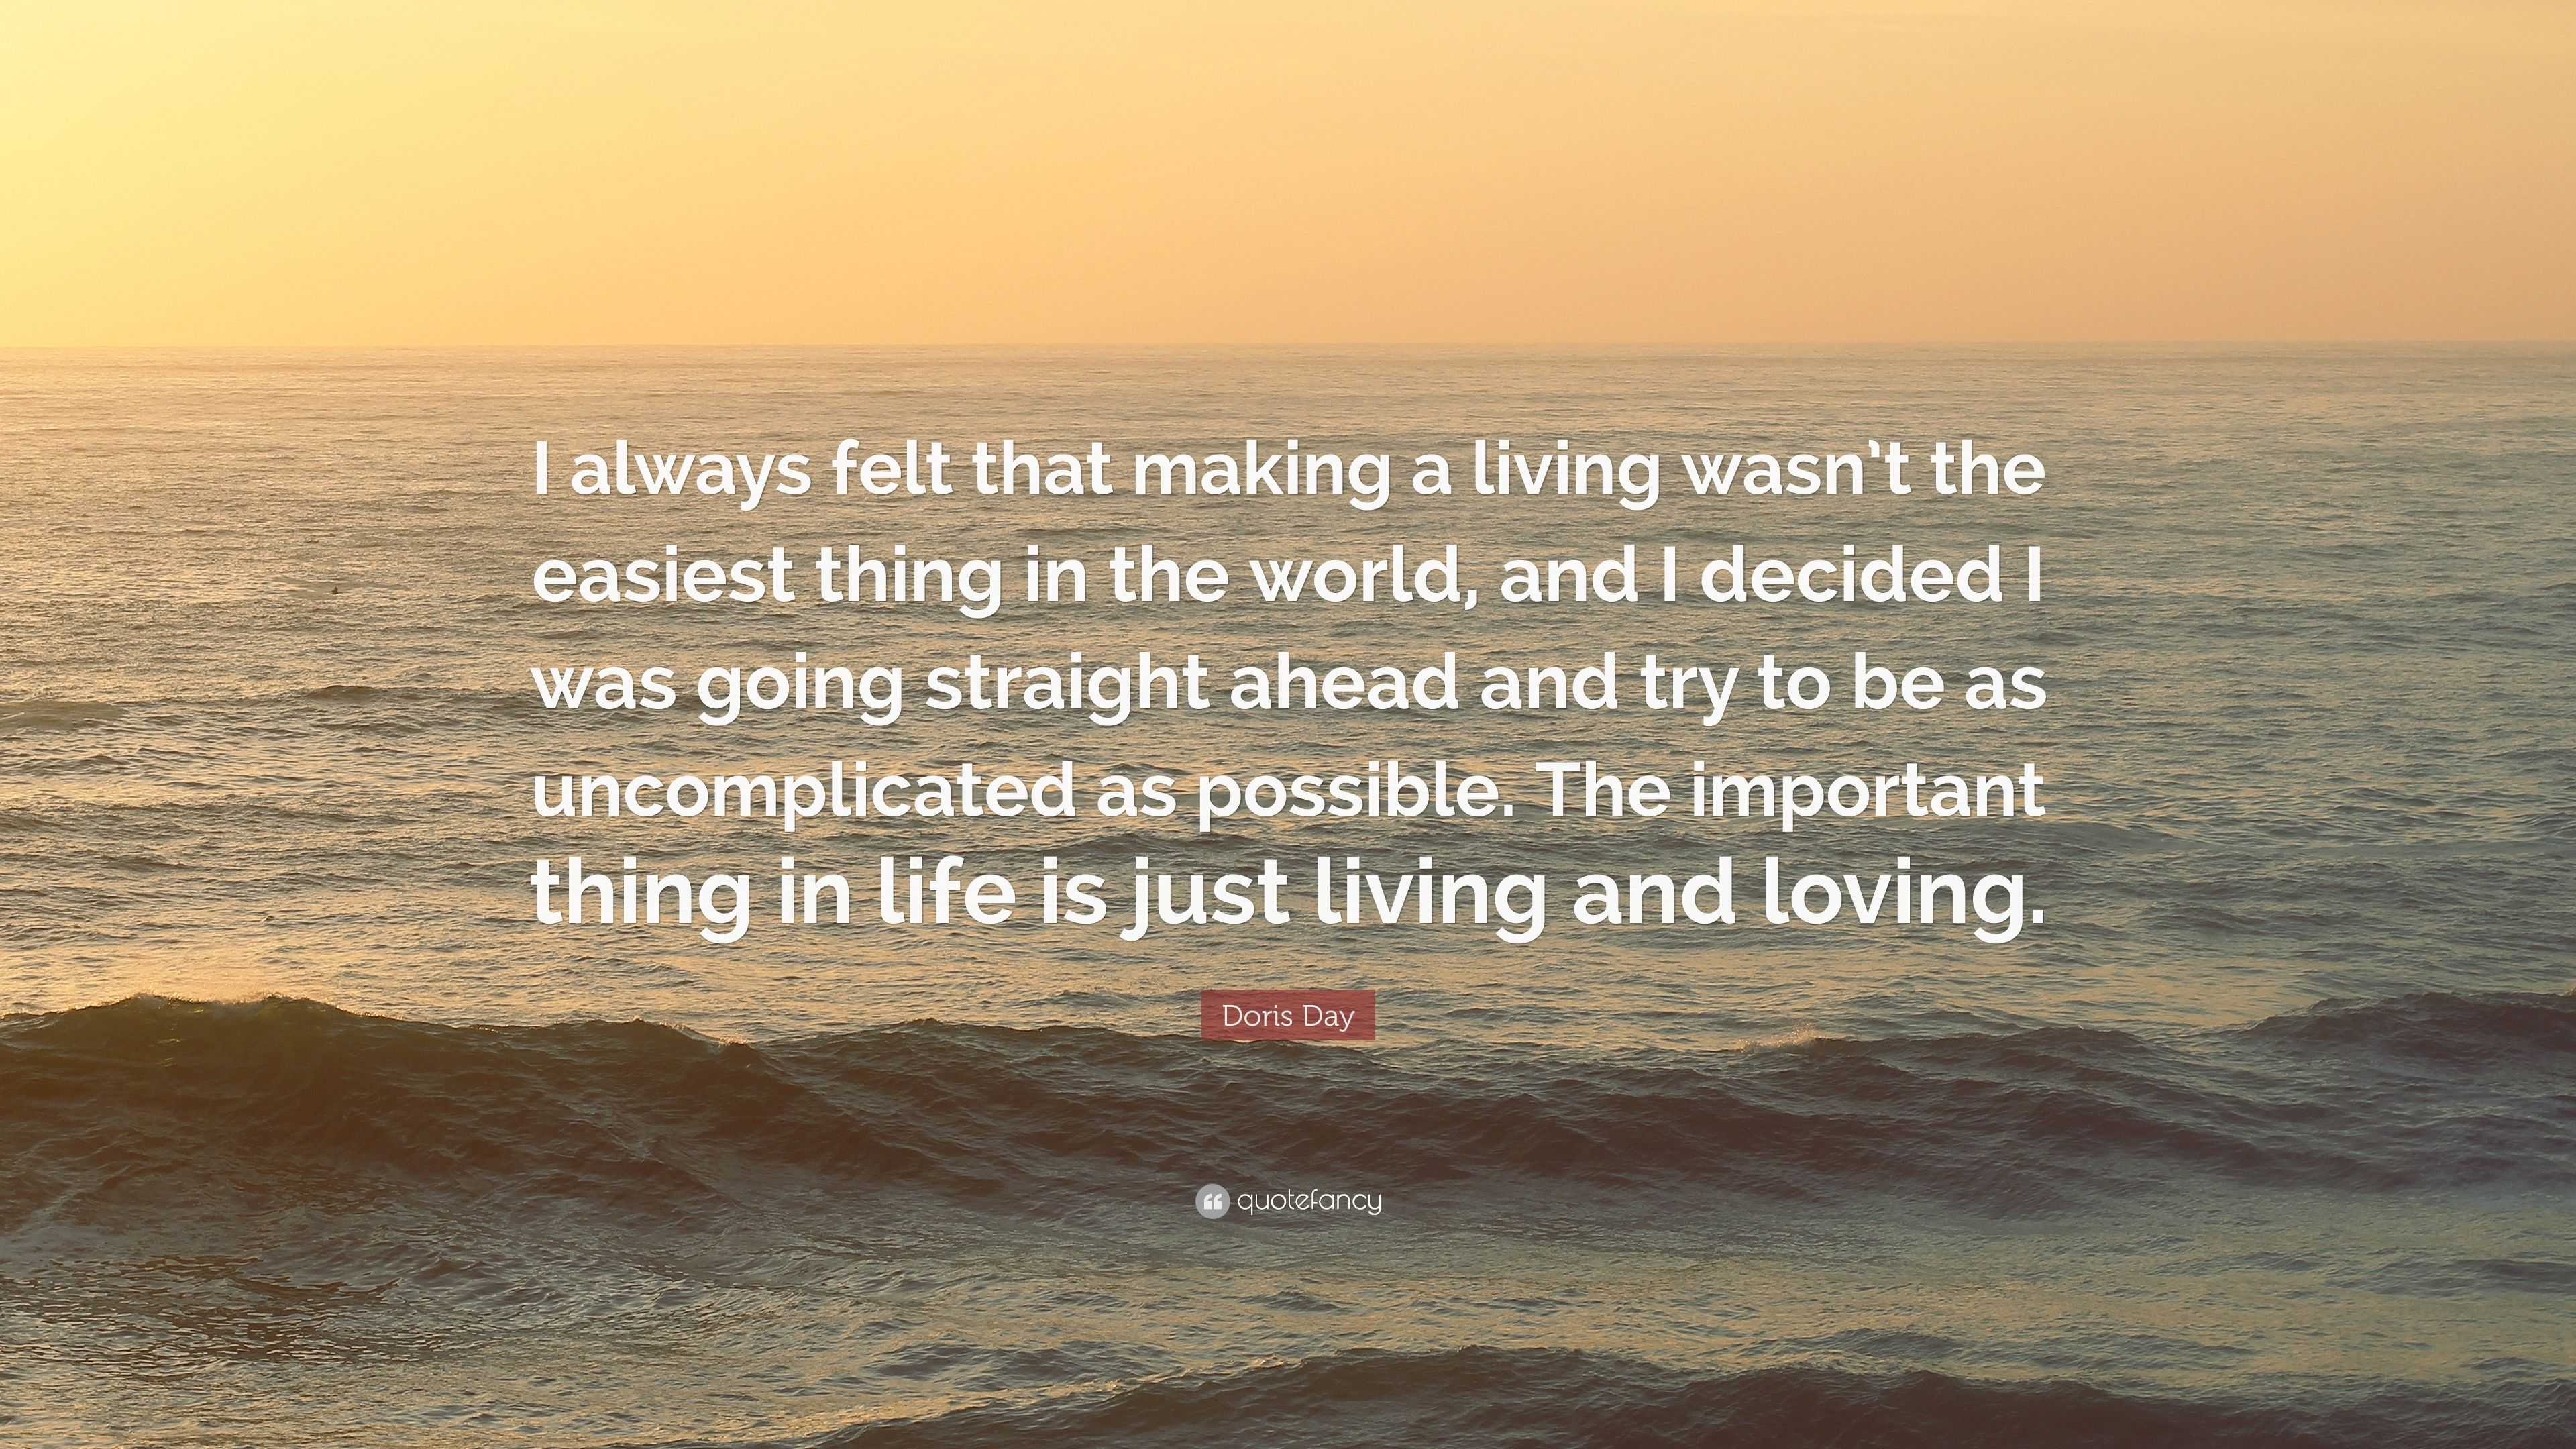 Doris Day Quote: “I always felt that making a living wasn’t the easiest ...